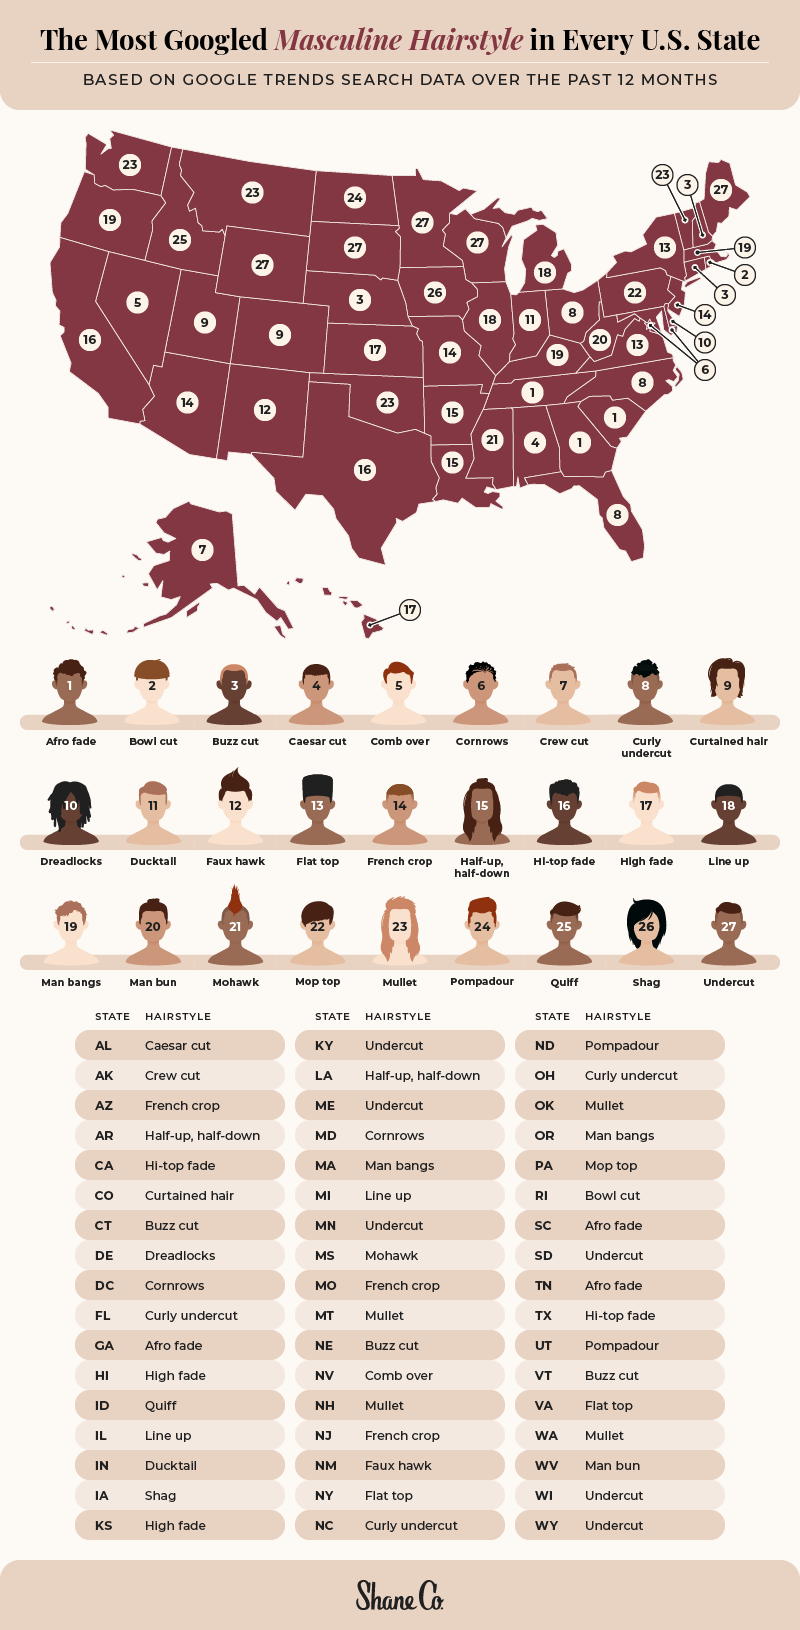 A U.S. map showing the most googled masculine hairstyle in every state